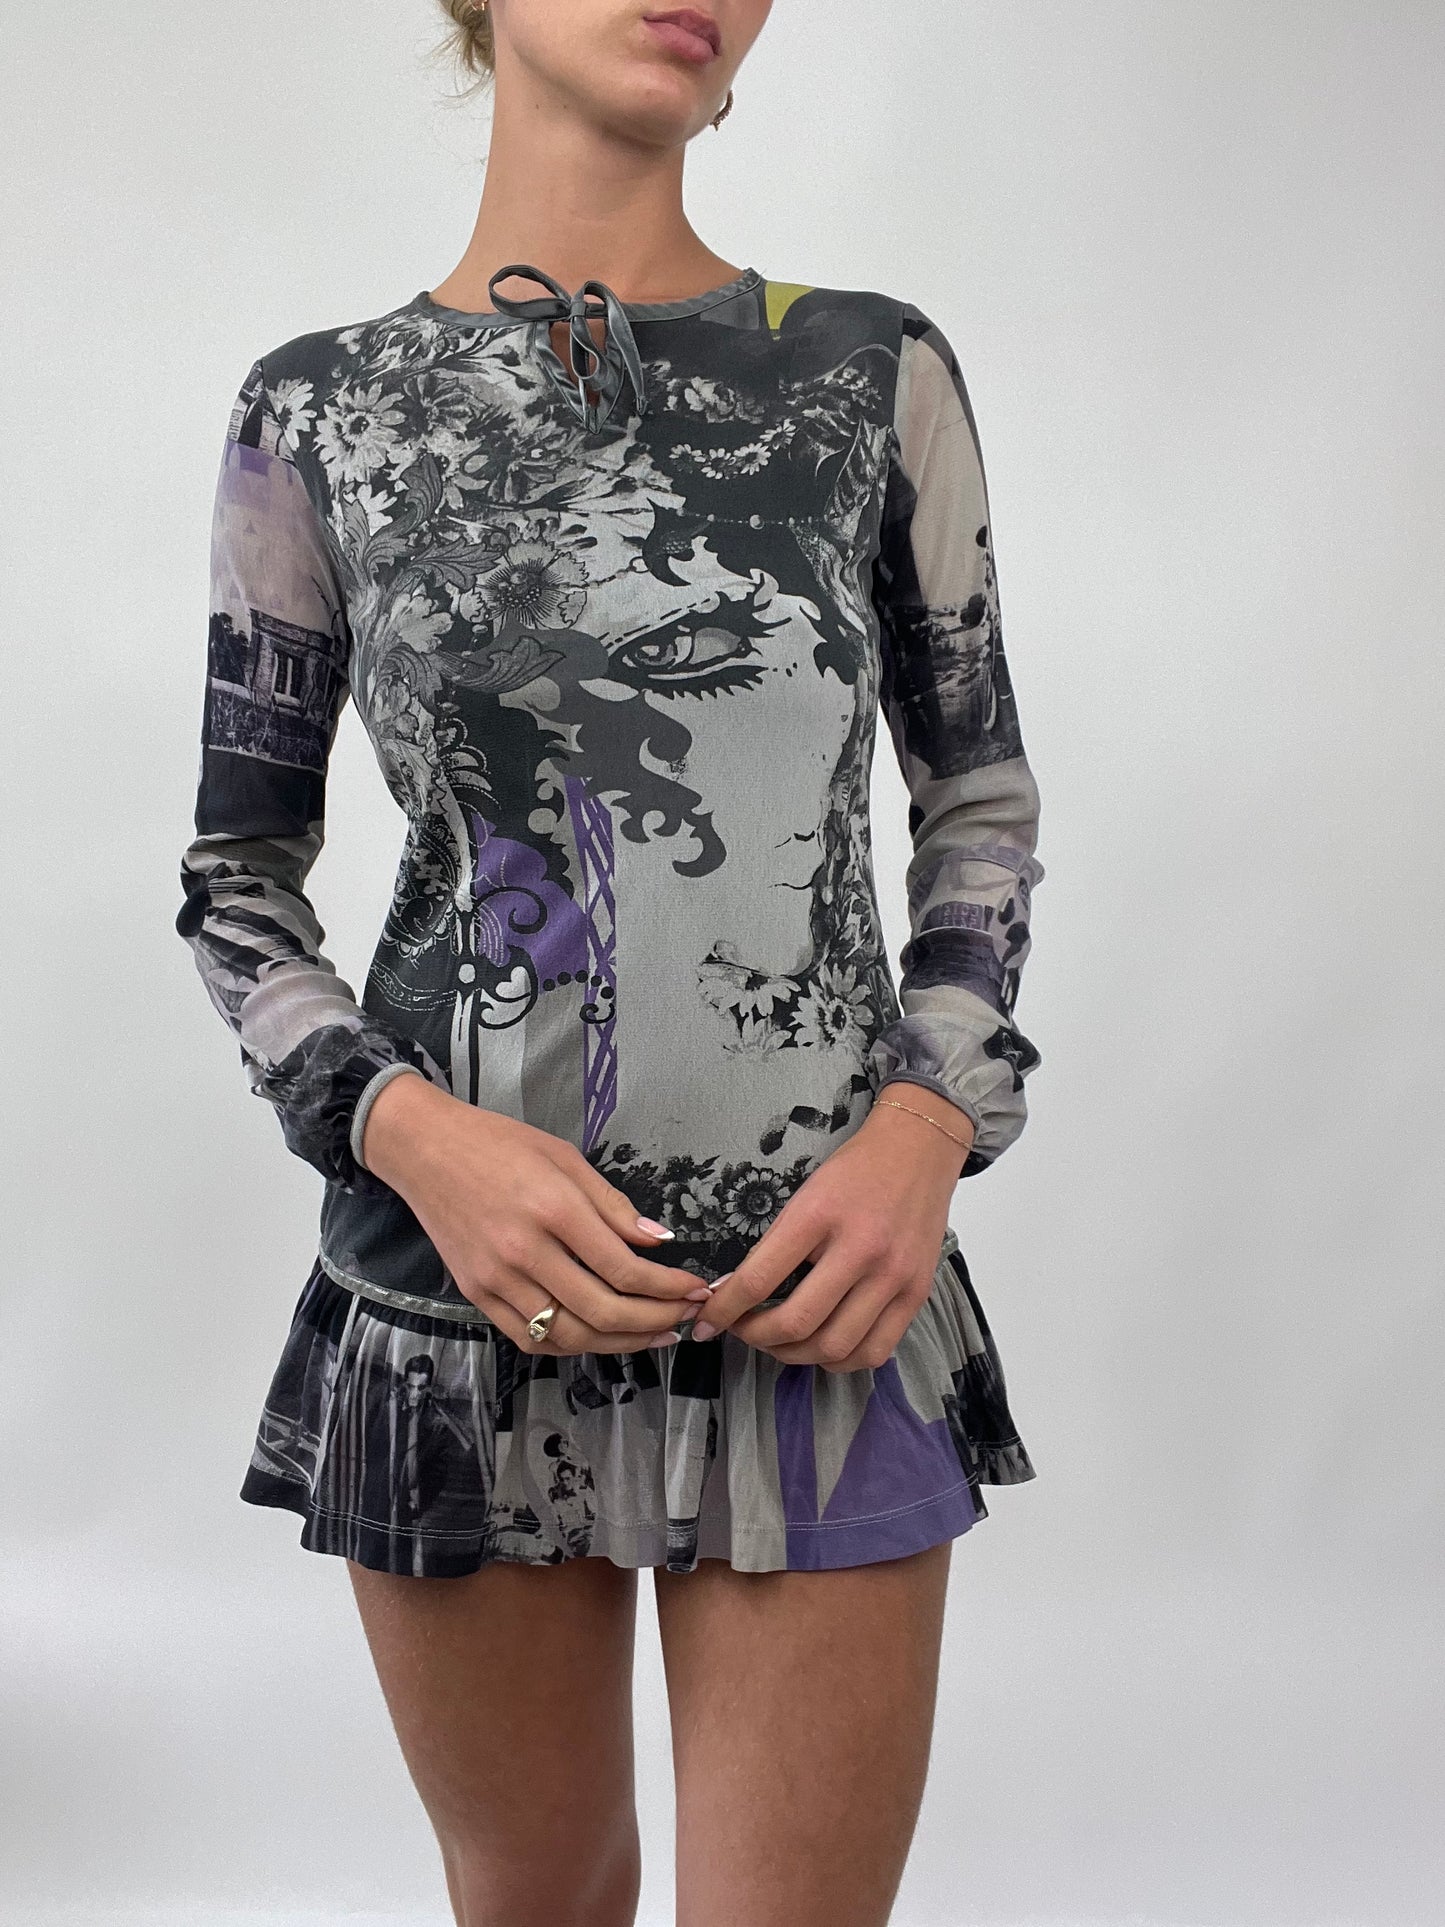 PALM BEACH DROP | small grey long sleeve dress with purple abstract pattern